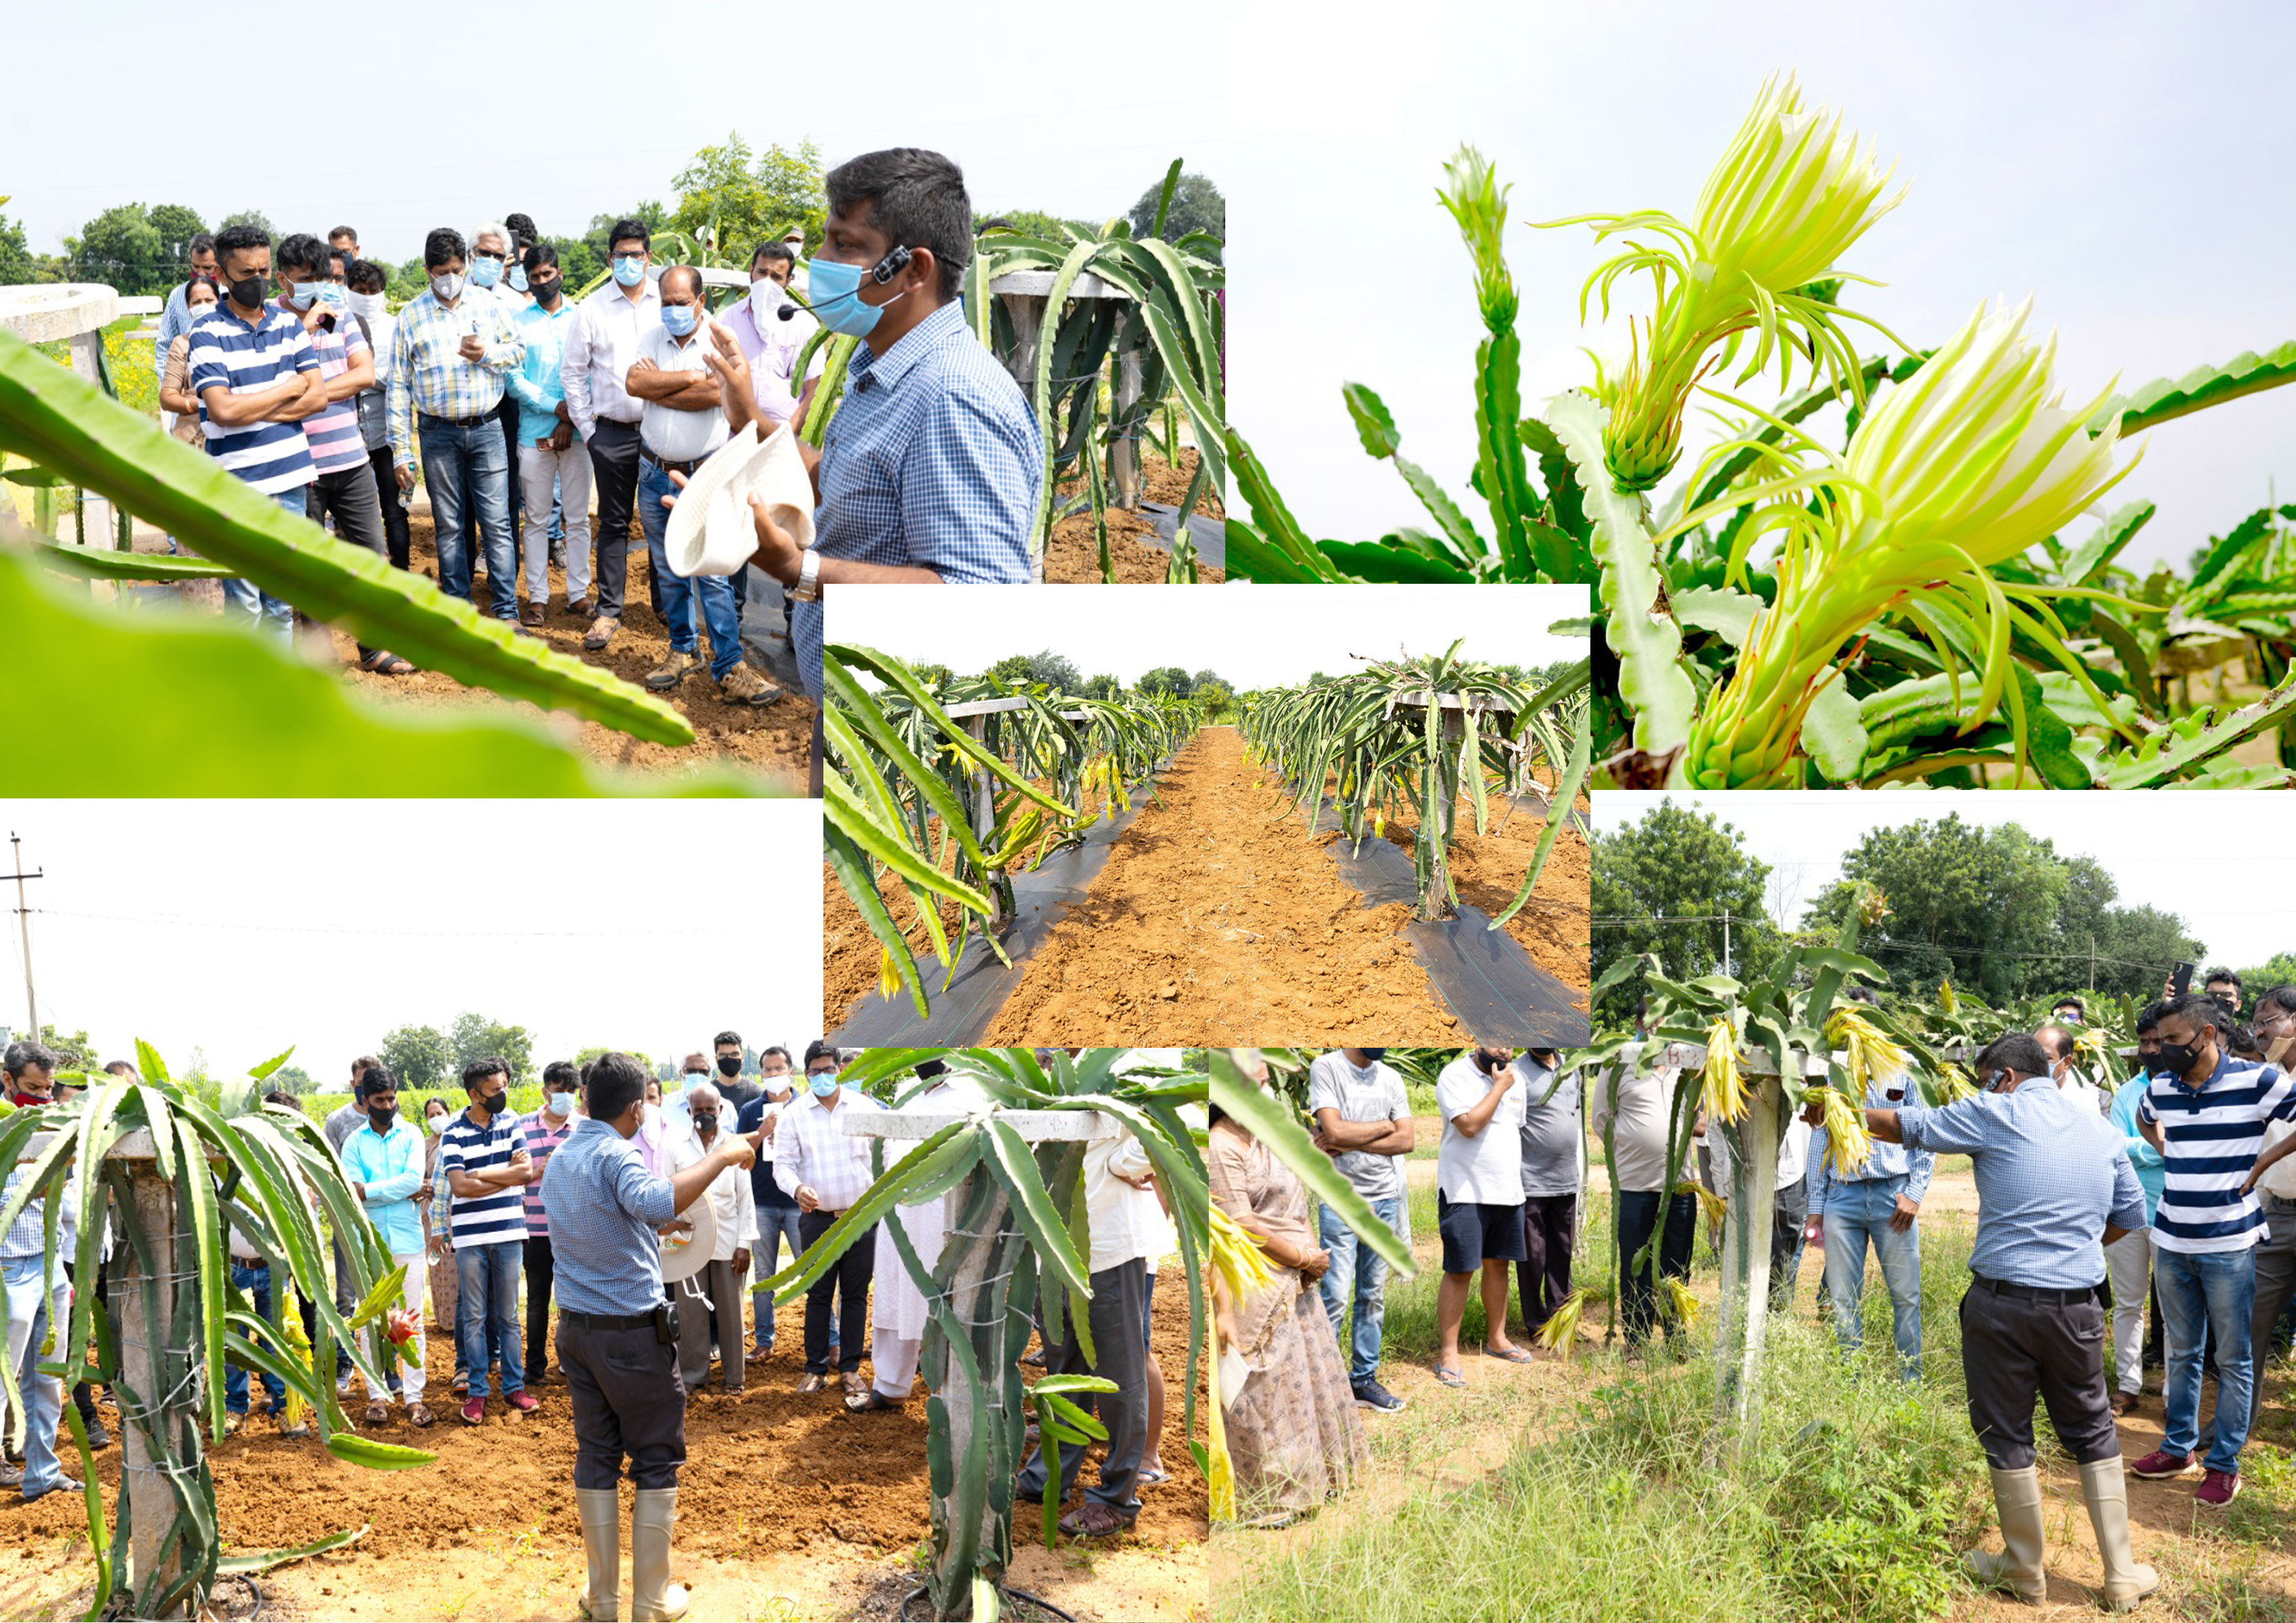 Farm visit to Deccanexotics by farmers and enthusiasts across 9 different states